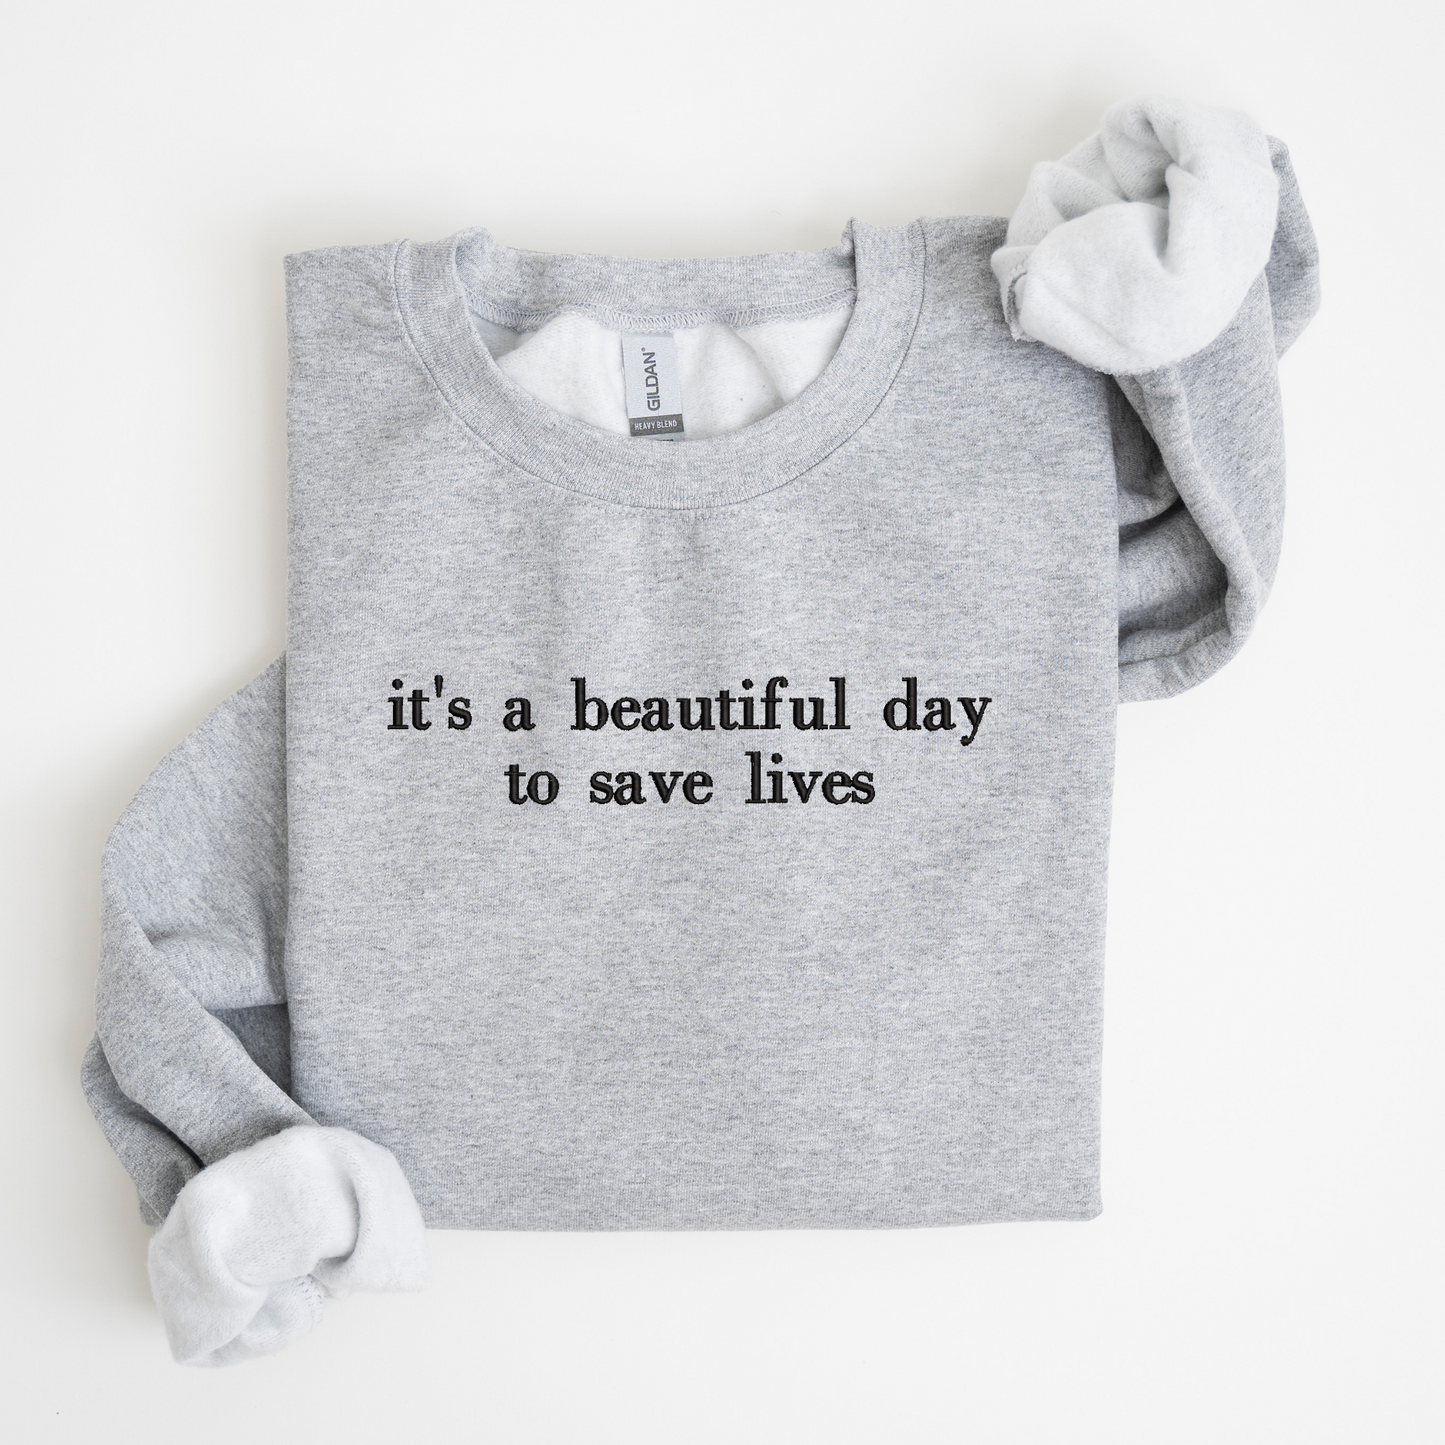 it's a beautiful day to save lives Embroidered Sweatshirt